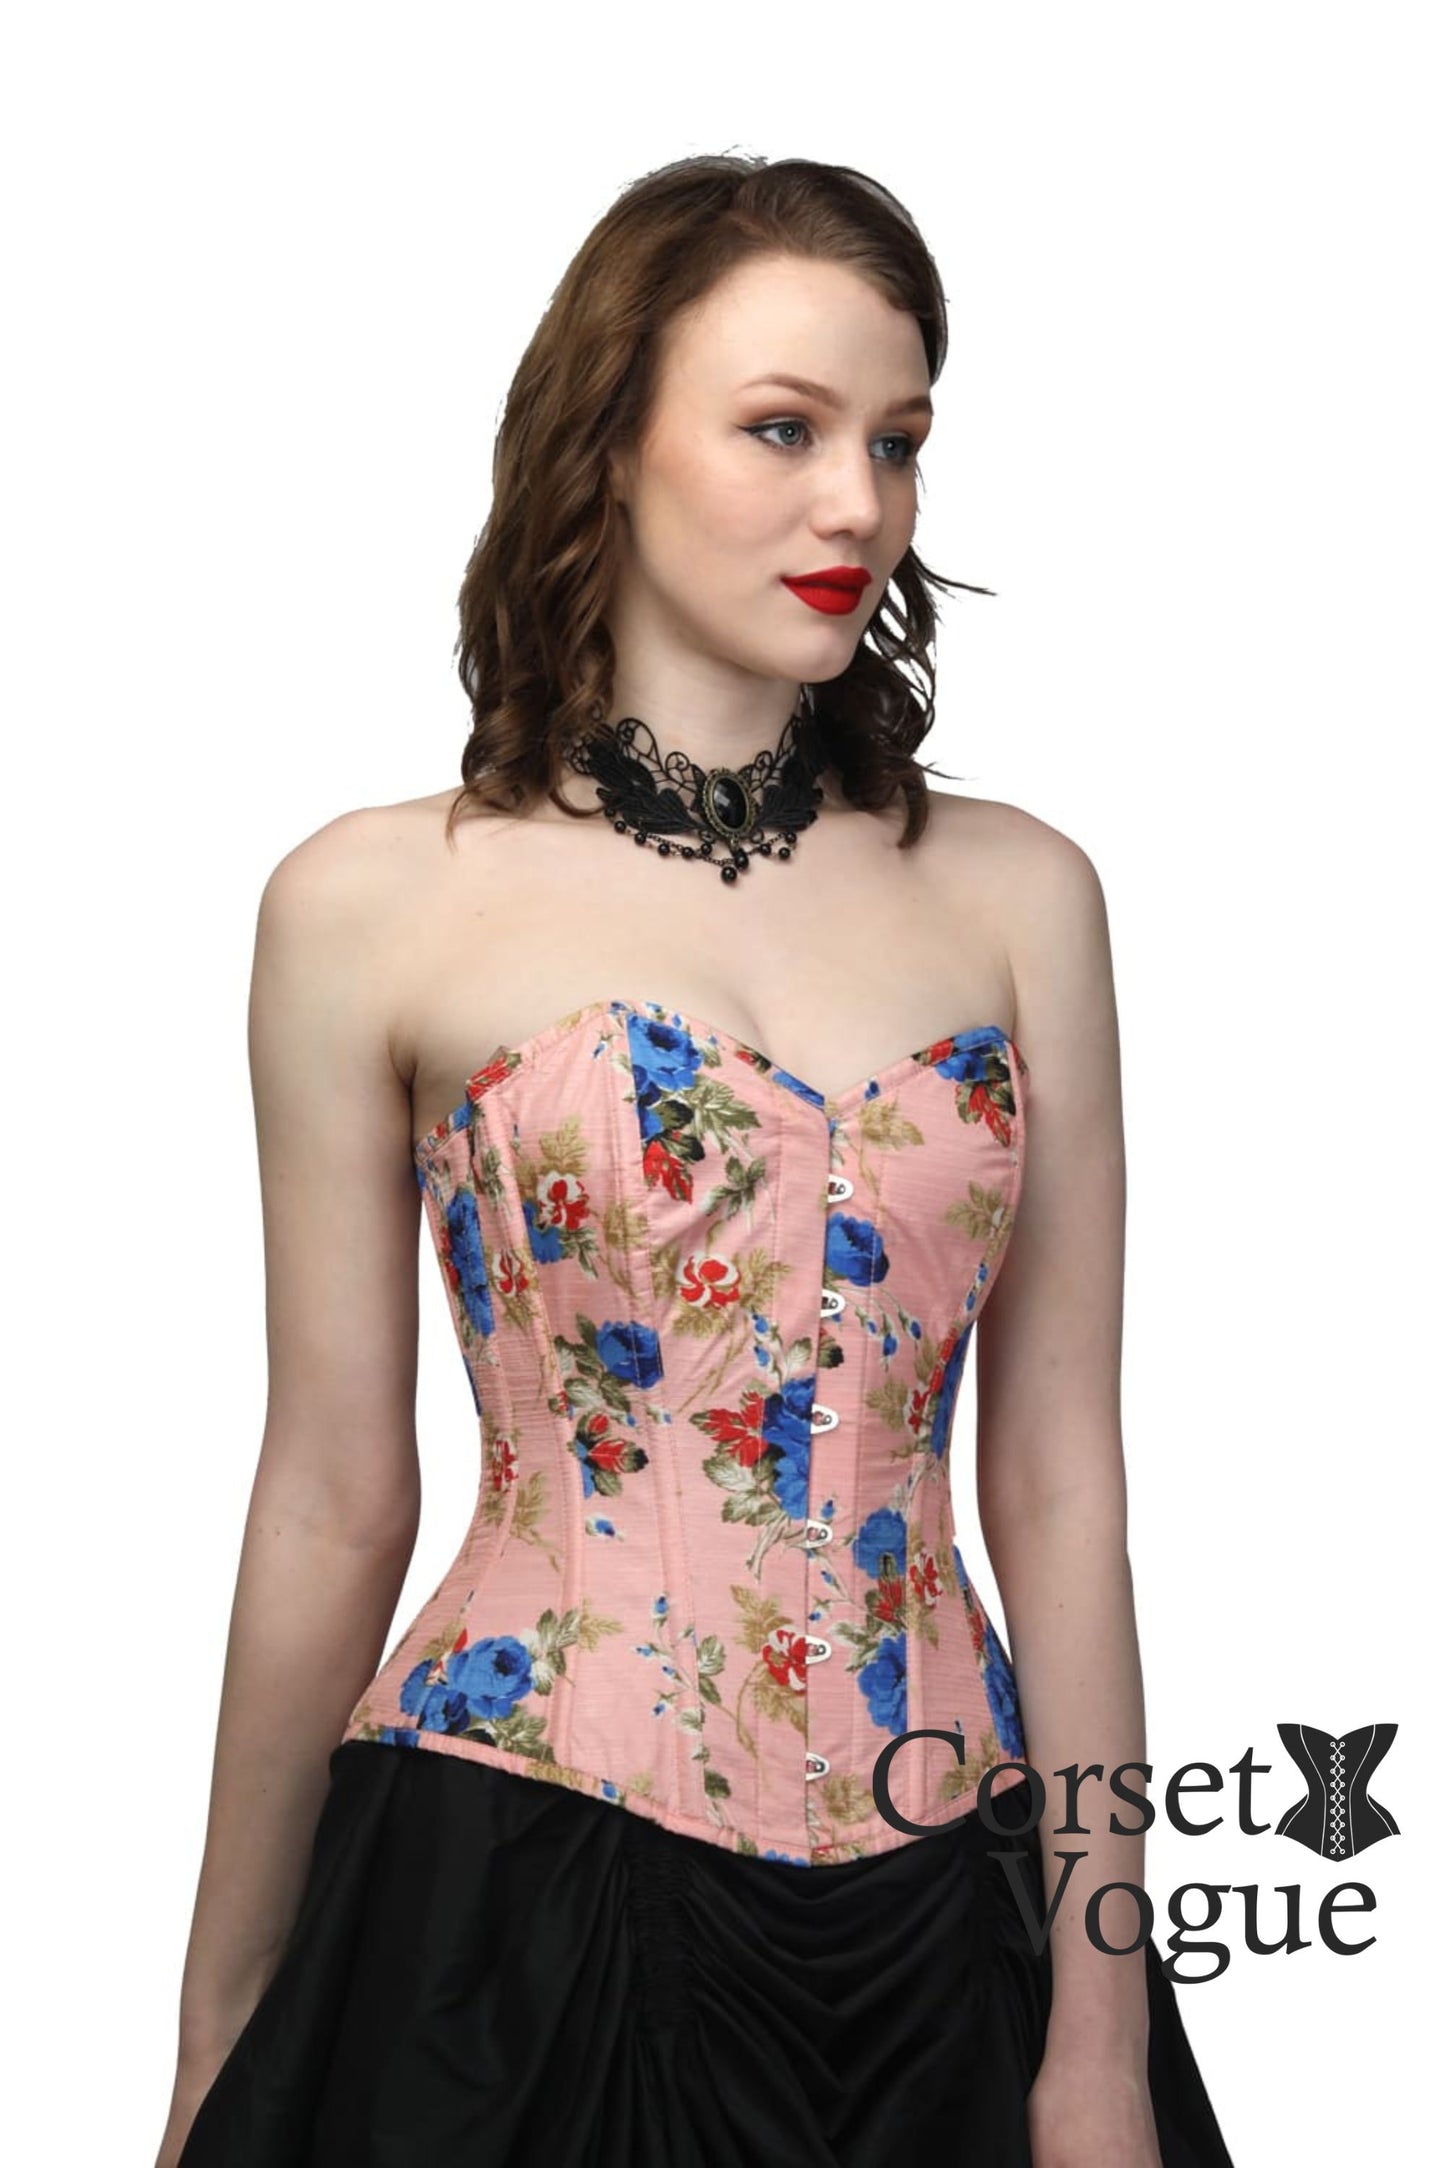 Printed Corset otherside 